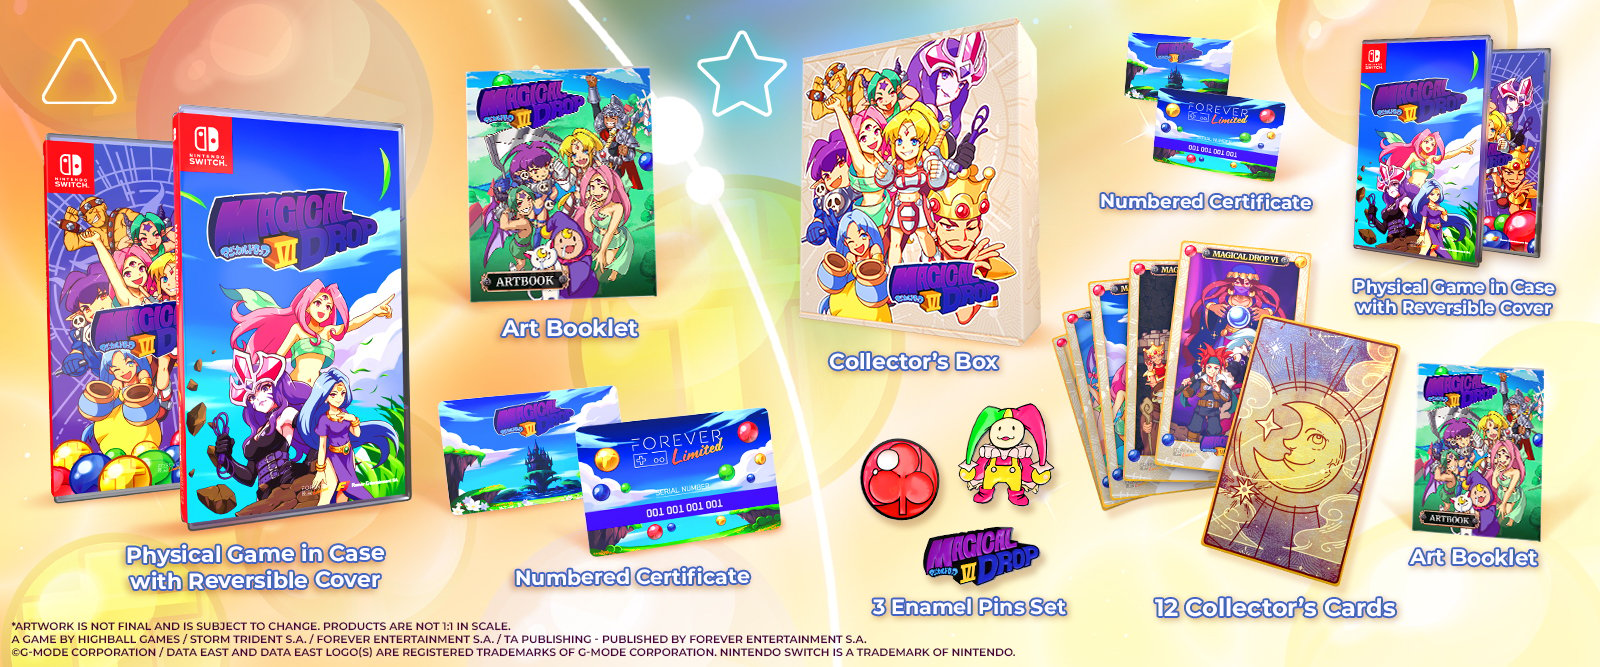 Magical Drop VI – Forever limited physical releases for Switch have been announced